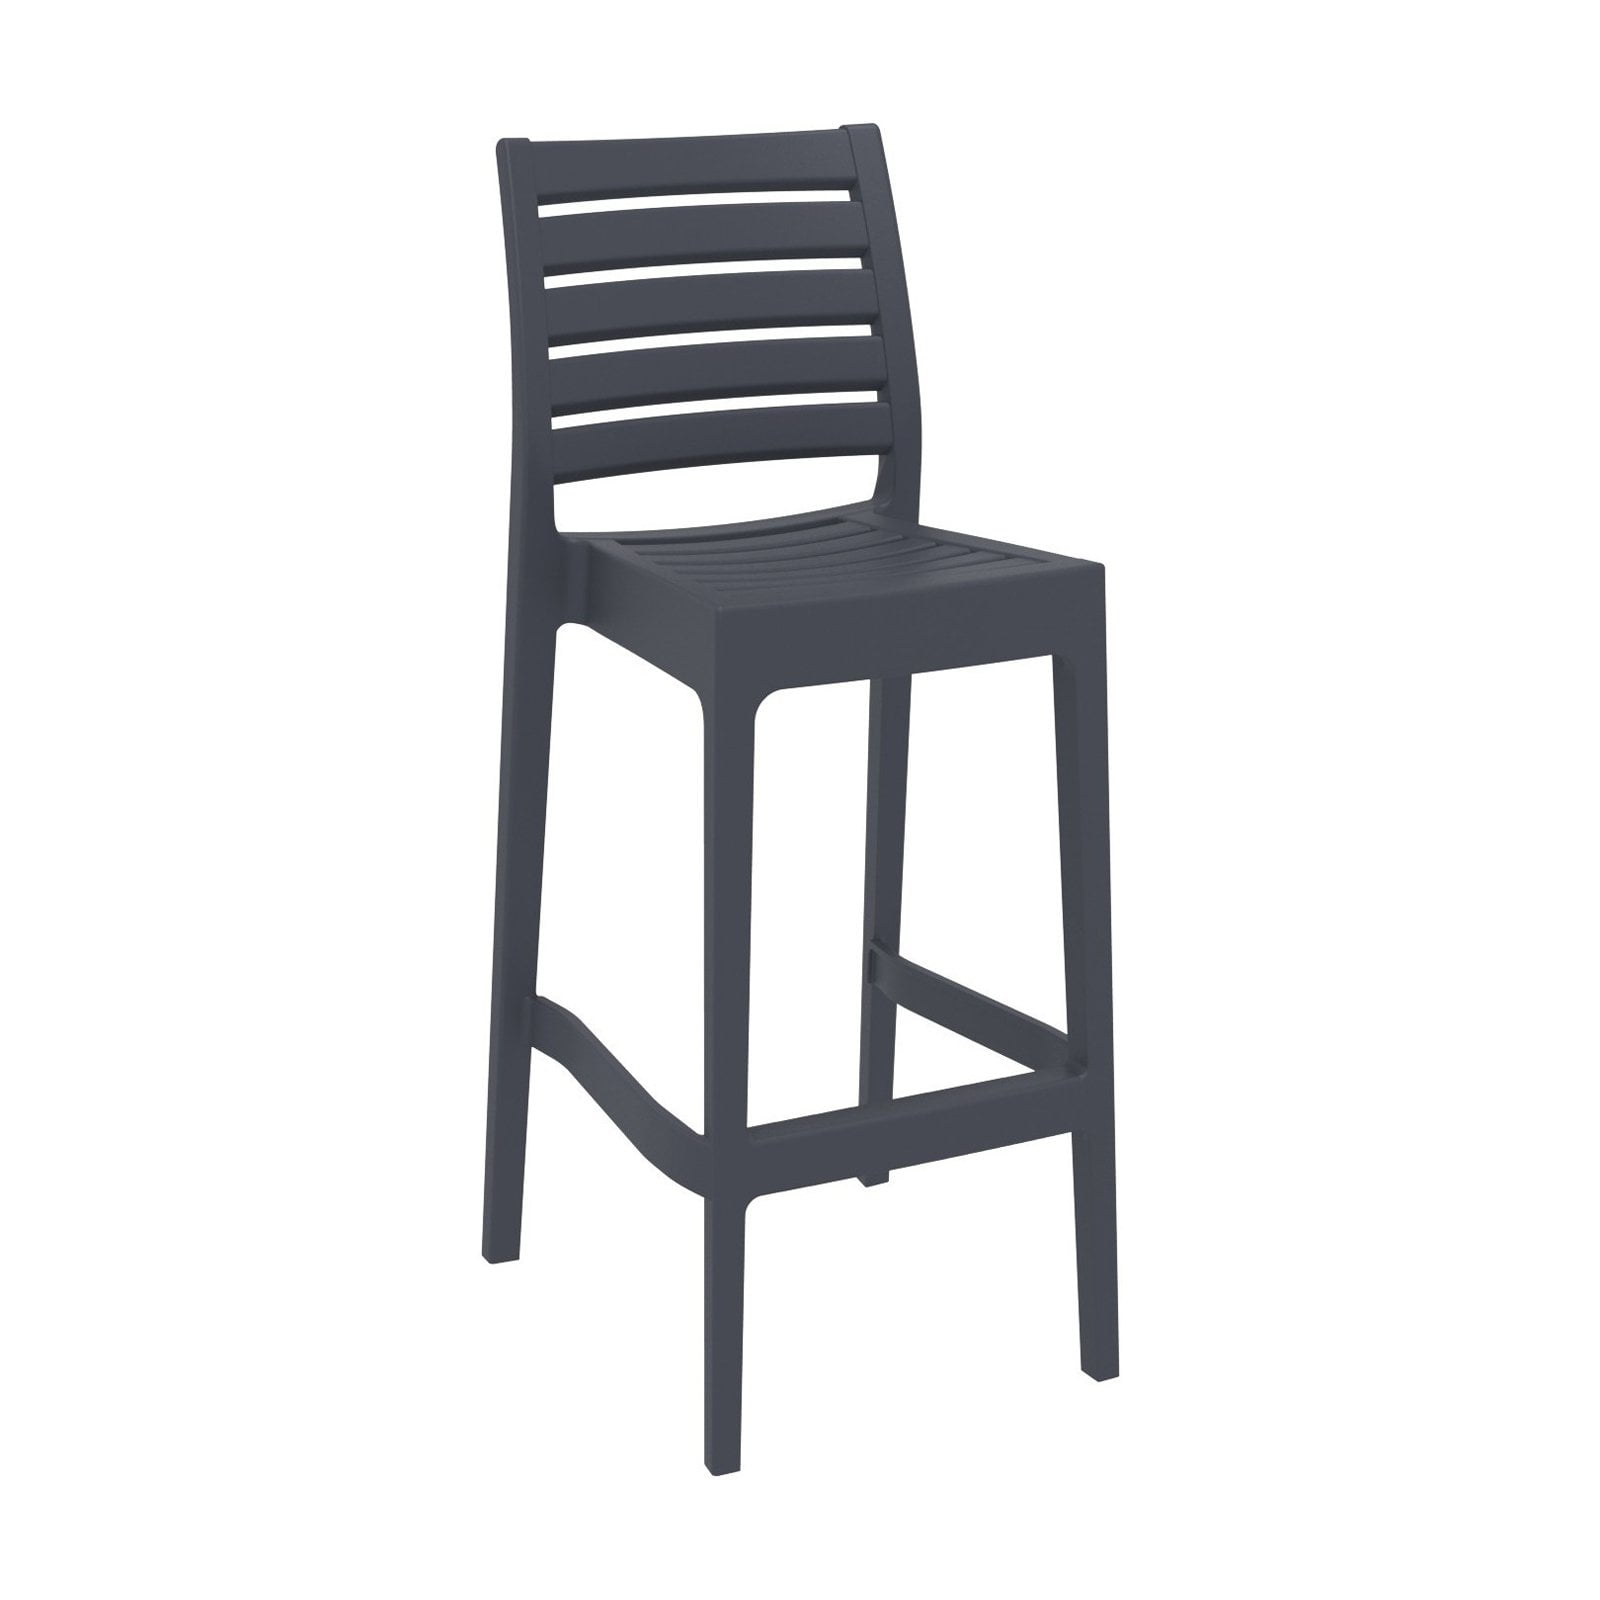 Siesta Ares Outdoor Resin Barstool, White Resin Outdoor Bar Stools